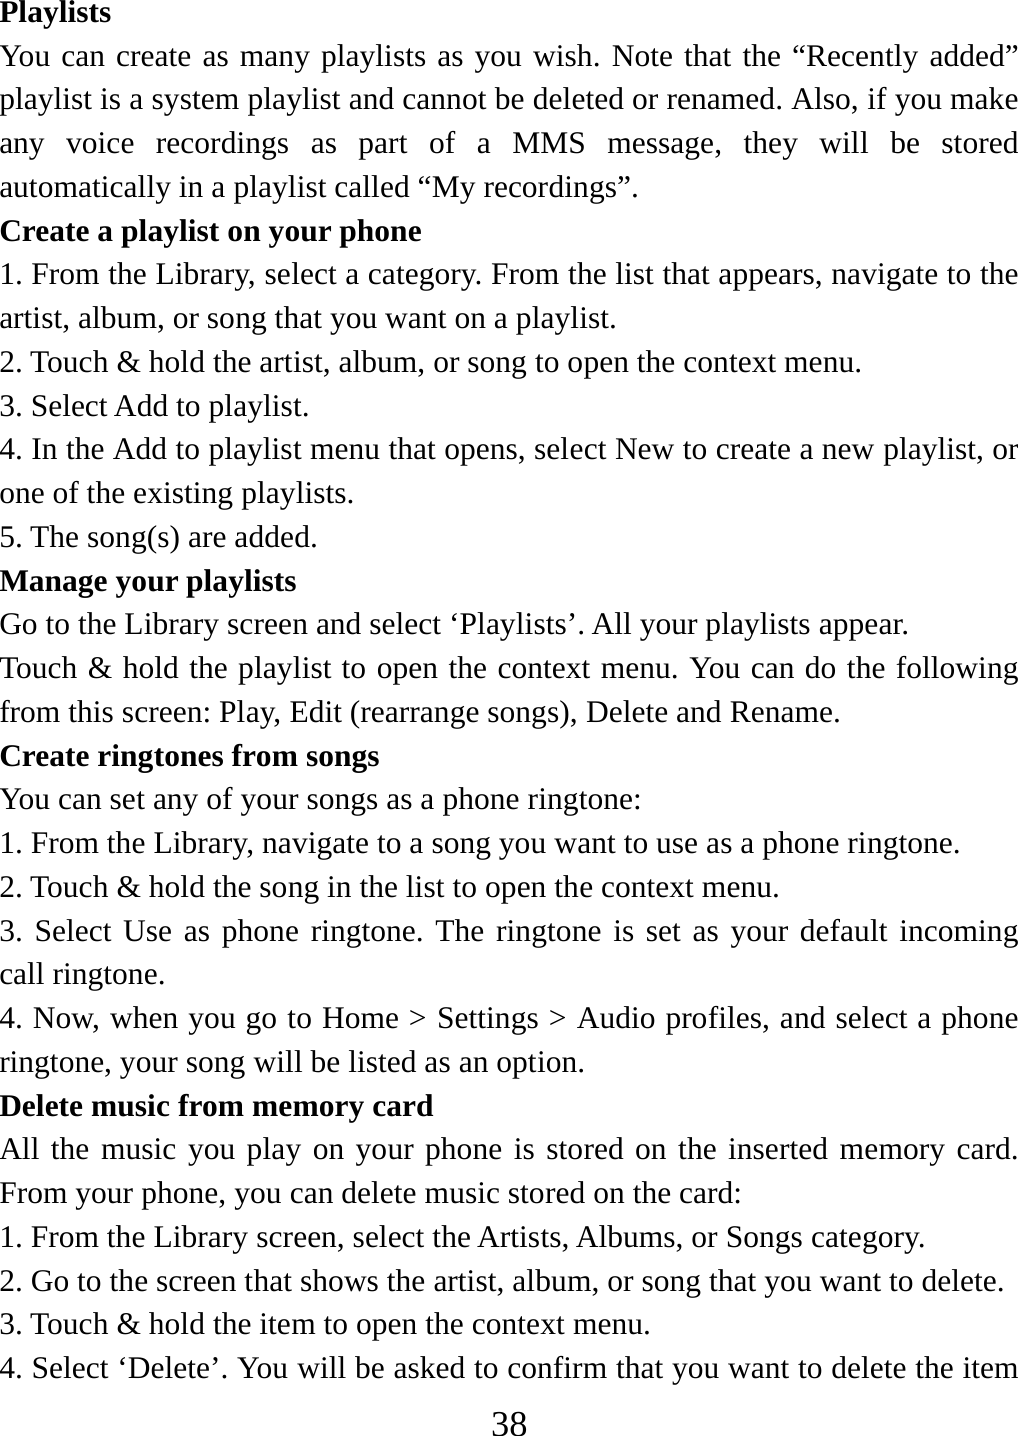   38Playlists  You can create as many playlists as you wish. Note that the “Recently added” playlist is a system playlist and cannot be deleted or renamed. Also, if you make any voice recordings as part of a MMS message, they will be stored automatically in a playlist called “My recordings”.   Create a playlist on your phone 1. From the Library, select a category. From the list that appears, navigate to the artist, album, or song that you want on a playlist.   2. Touch &amp; hold the artist, album, or song to open the context menu.   3. Select Add to playlist.   4. In the Add to playlist menu that opens, select New to create a new playlist, or one of the existing playlists.   5. The song(s) are added.     Manage your playlists   Go to the Library screen and select ‘Playlists’. All your playlists appear.   Touch &amp; hold the playlist to open the context menu. You can do the following from this screen: Play, Edit (rearrange songs), Delete and Rename. Create ringtones from songs   You can set any of your songs as a phone ringtone:   1. From the Library, navigate to a song you want to use as a phone ringtone.   2. Touch &amp; hold the song in the list to open the context menu.   3. Select Use as phone ringtone. The ringtone is set as your default incoming call ringtone.   4. Now, when you go to Home &gt; Settings &gt; Audio profiles, and select a phone ringtone, your song will be listed as an option. Delete music from memory card   All the music you play on your phone is stored on the inserted memory card. From your phone, you can delete music stored on the card:   1. From the Library screen, select the Artists, Albums, or Songs category.   2. Go to the screen that shows the artist, album, or song that you want to delete.   3. Touch &amp; hold the item to open the context menu.   4. Select ‘Delete’. You will be asked to confirm that you want to delete the item 